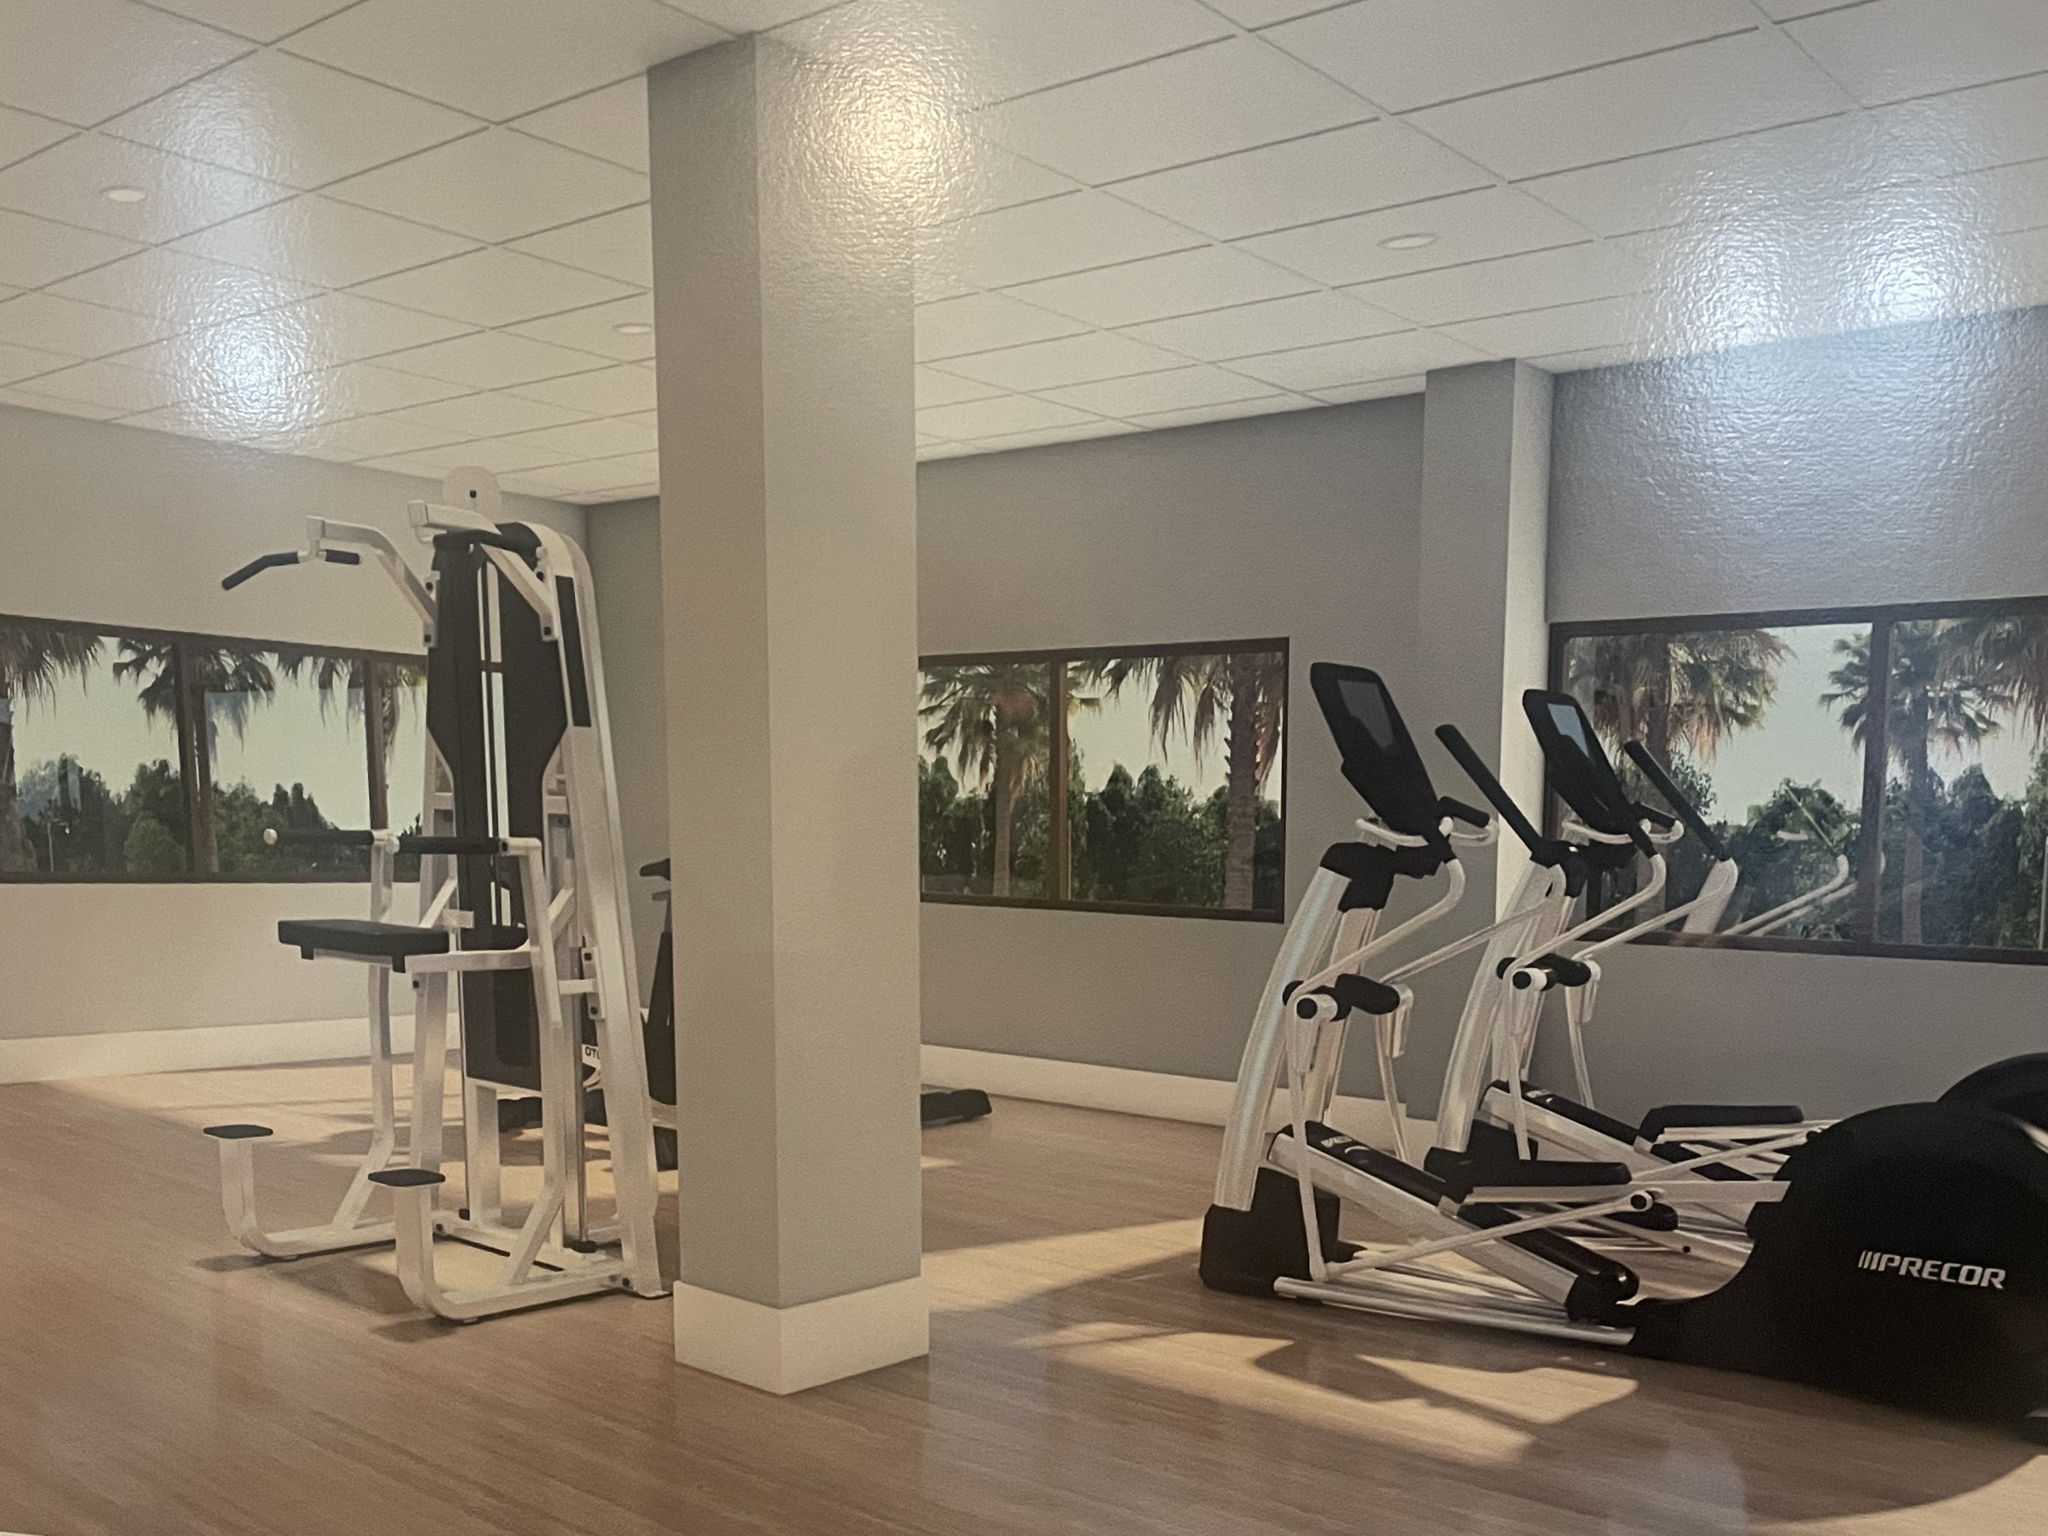 Rendering of proposed gym